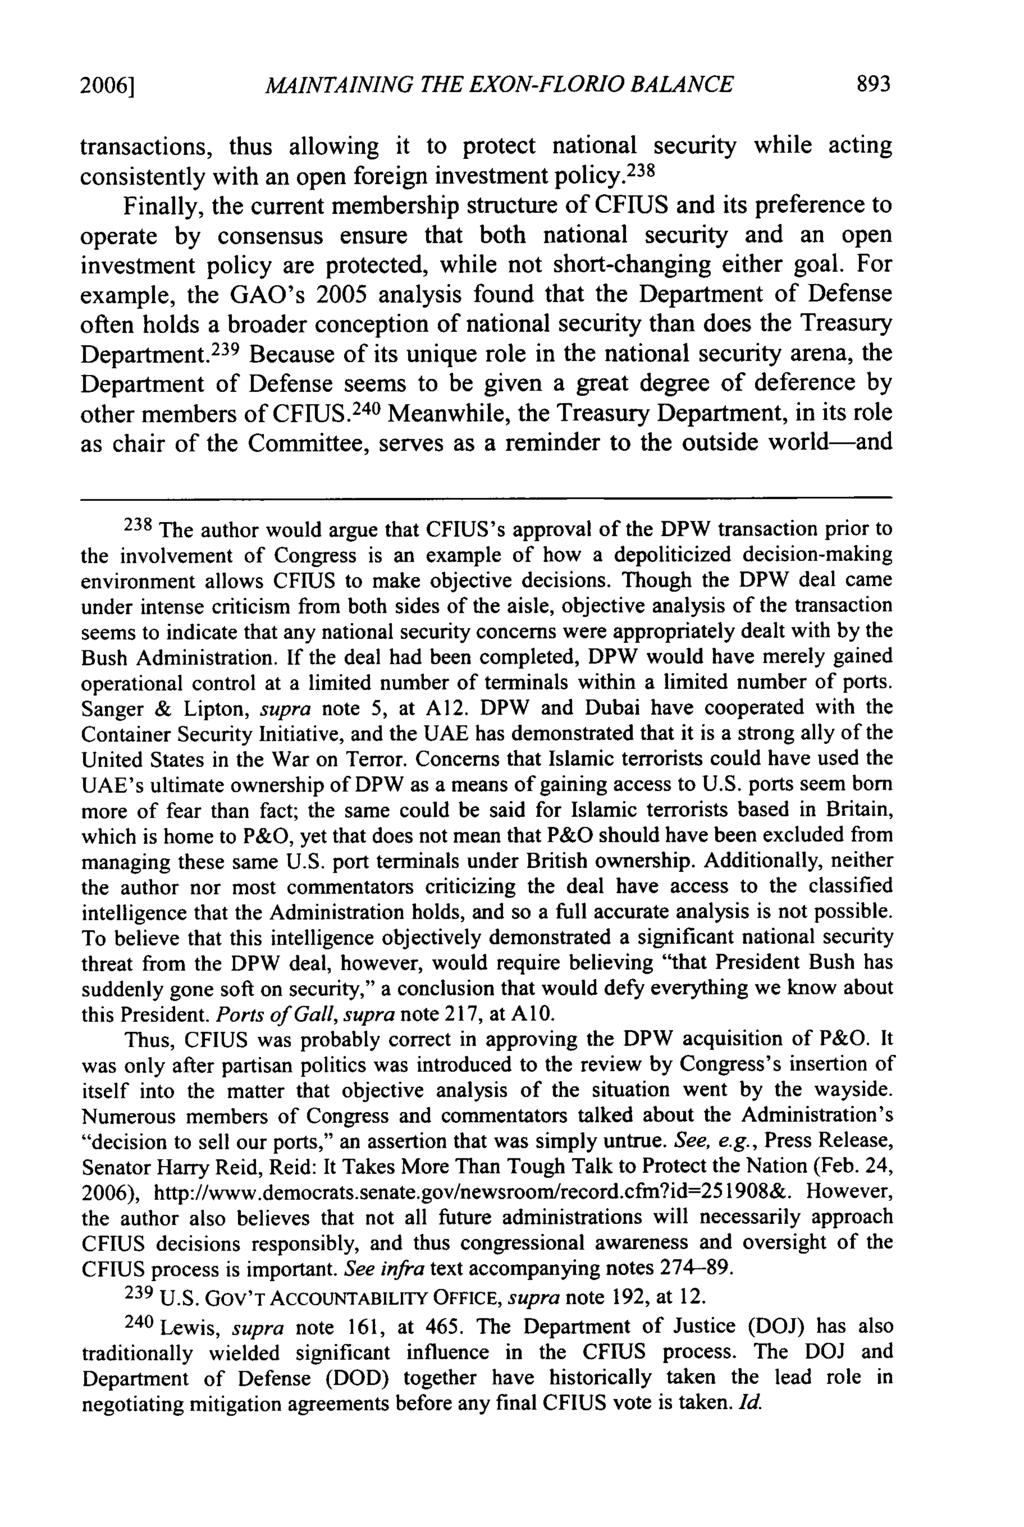 2006] MAINTAINING THE EXON-FLORIO BALANCE transactions, thus allowing it to protect national security while acting consistently with an open foreign investment policy.